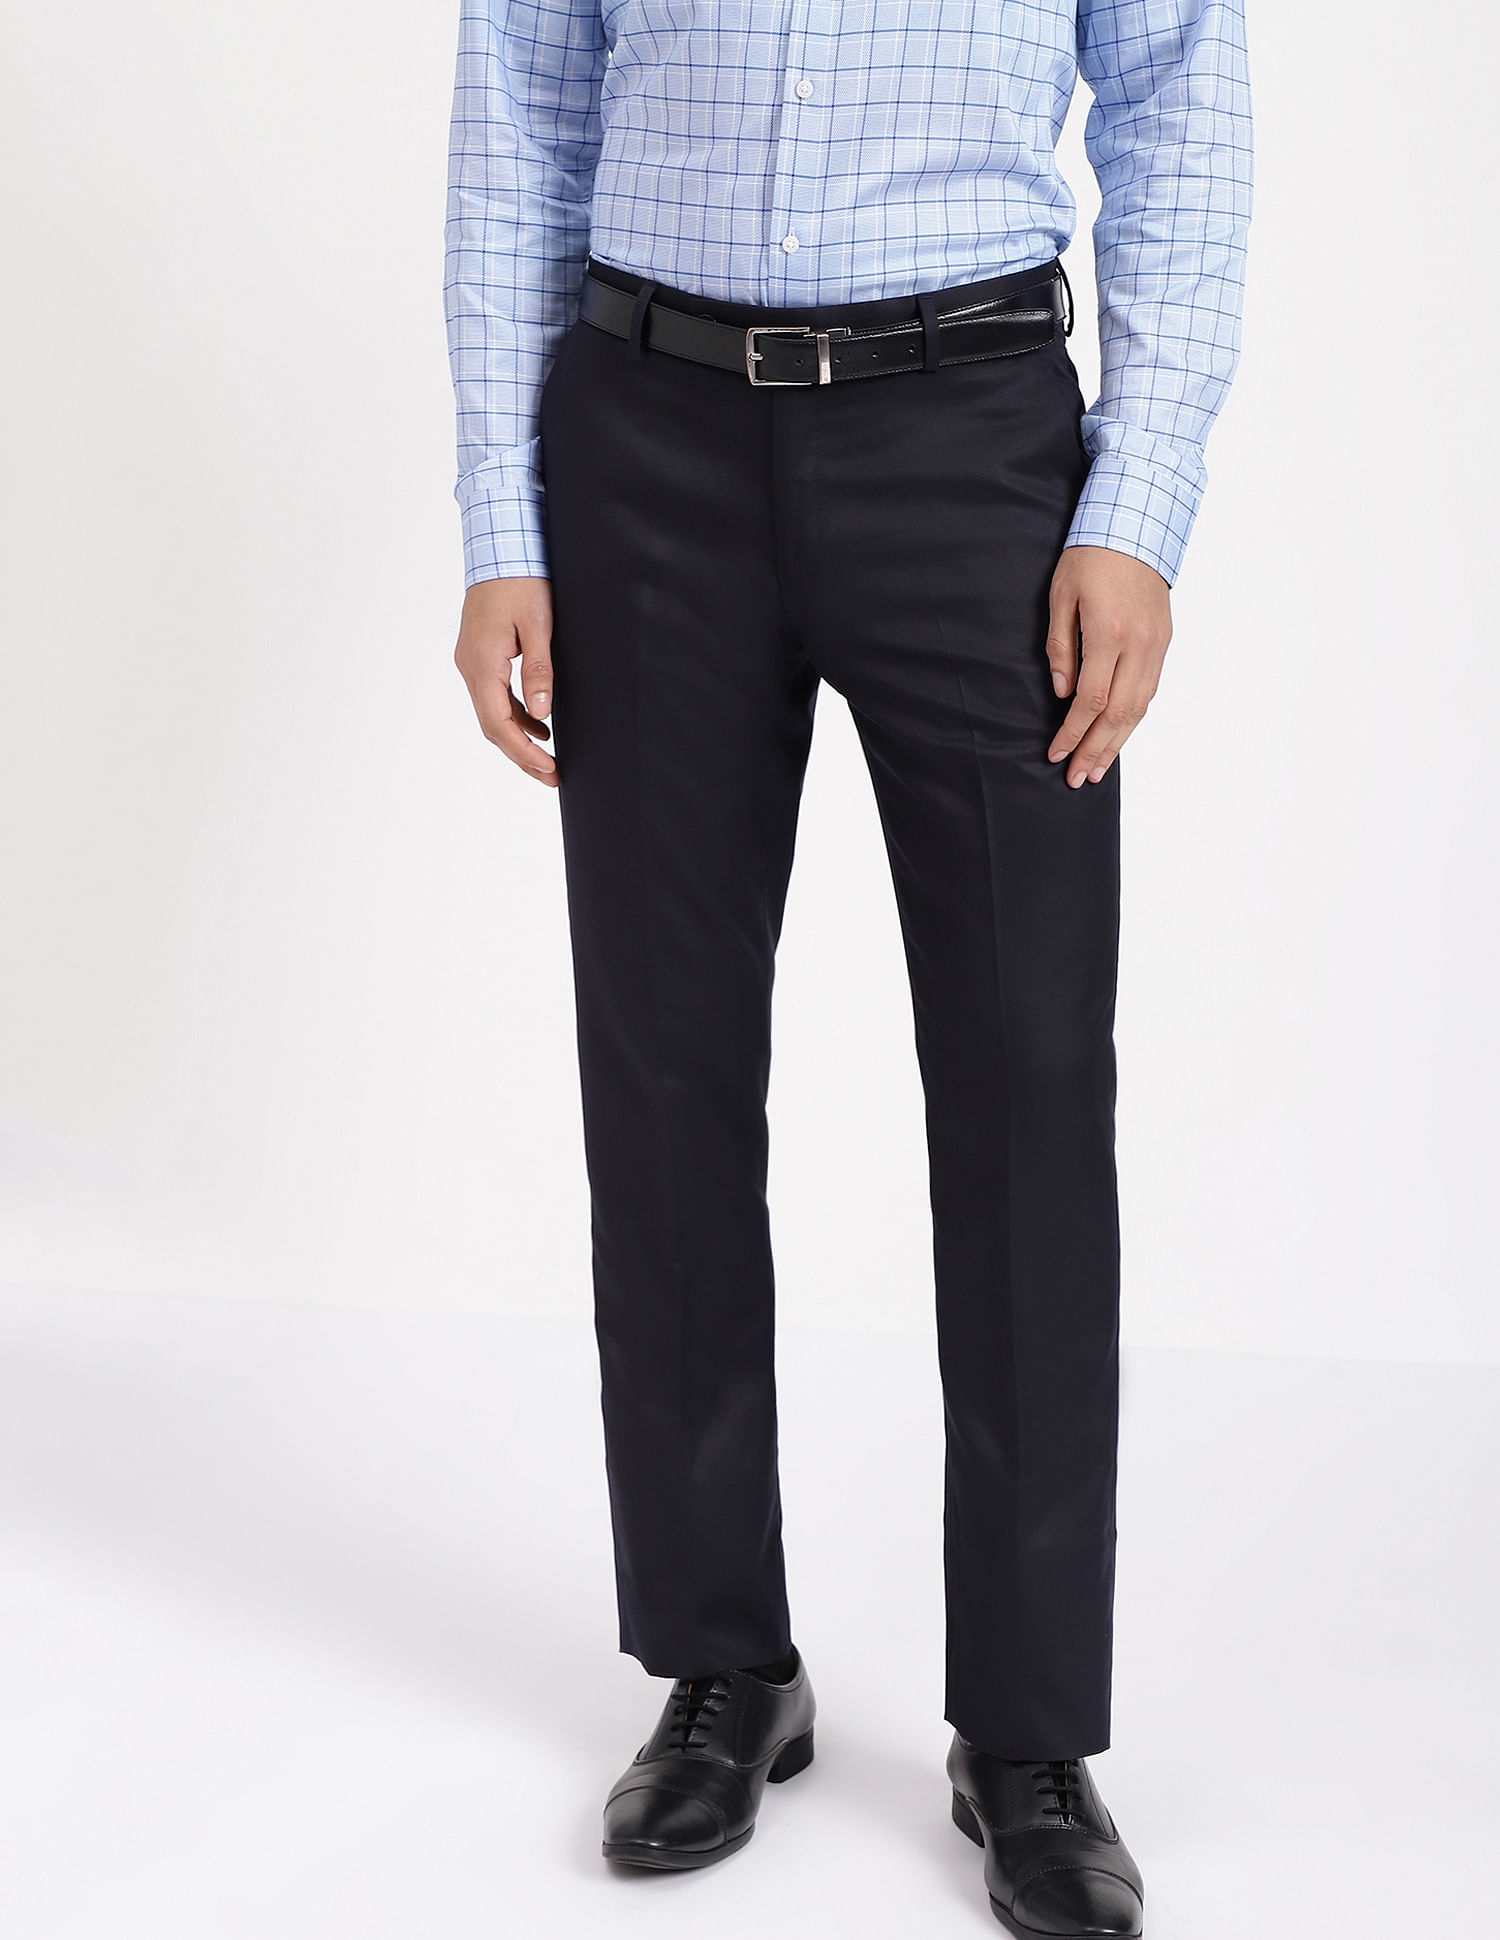 Buy Arrow New York Navy Slim Fit Trousers from top Brands at Best Prices  Online in India | Tata CLiQ